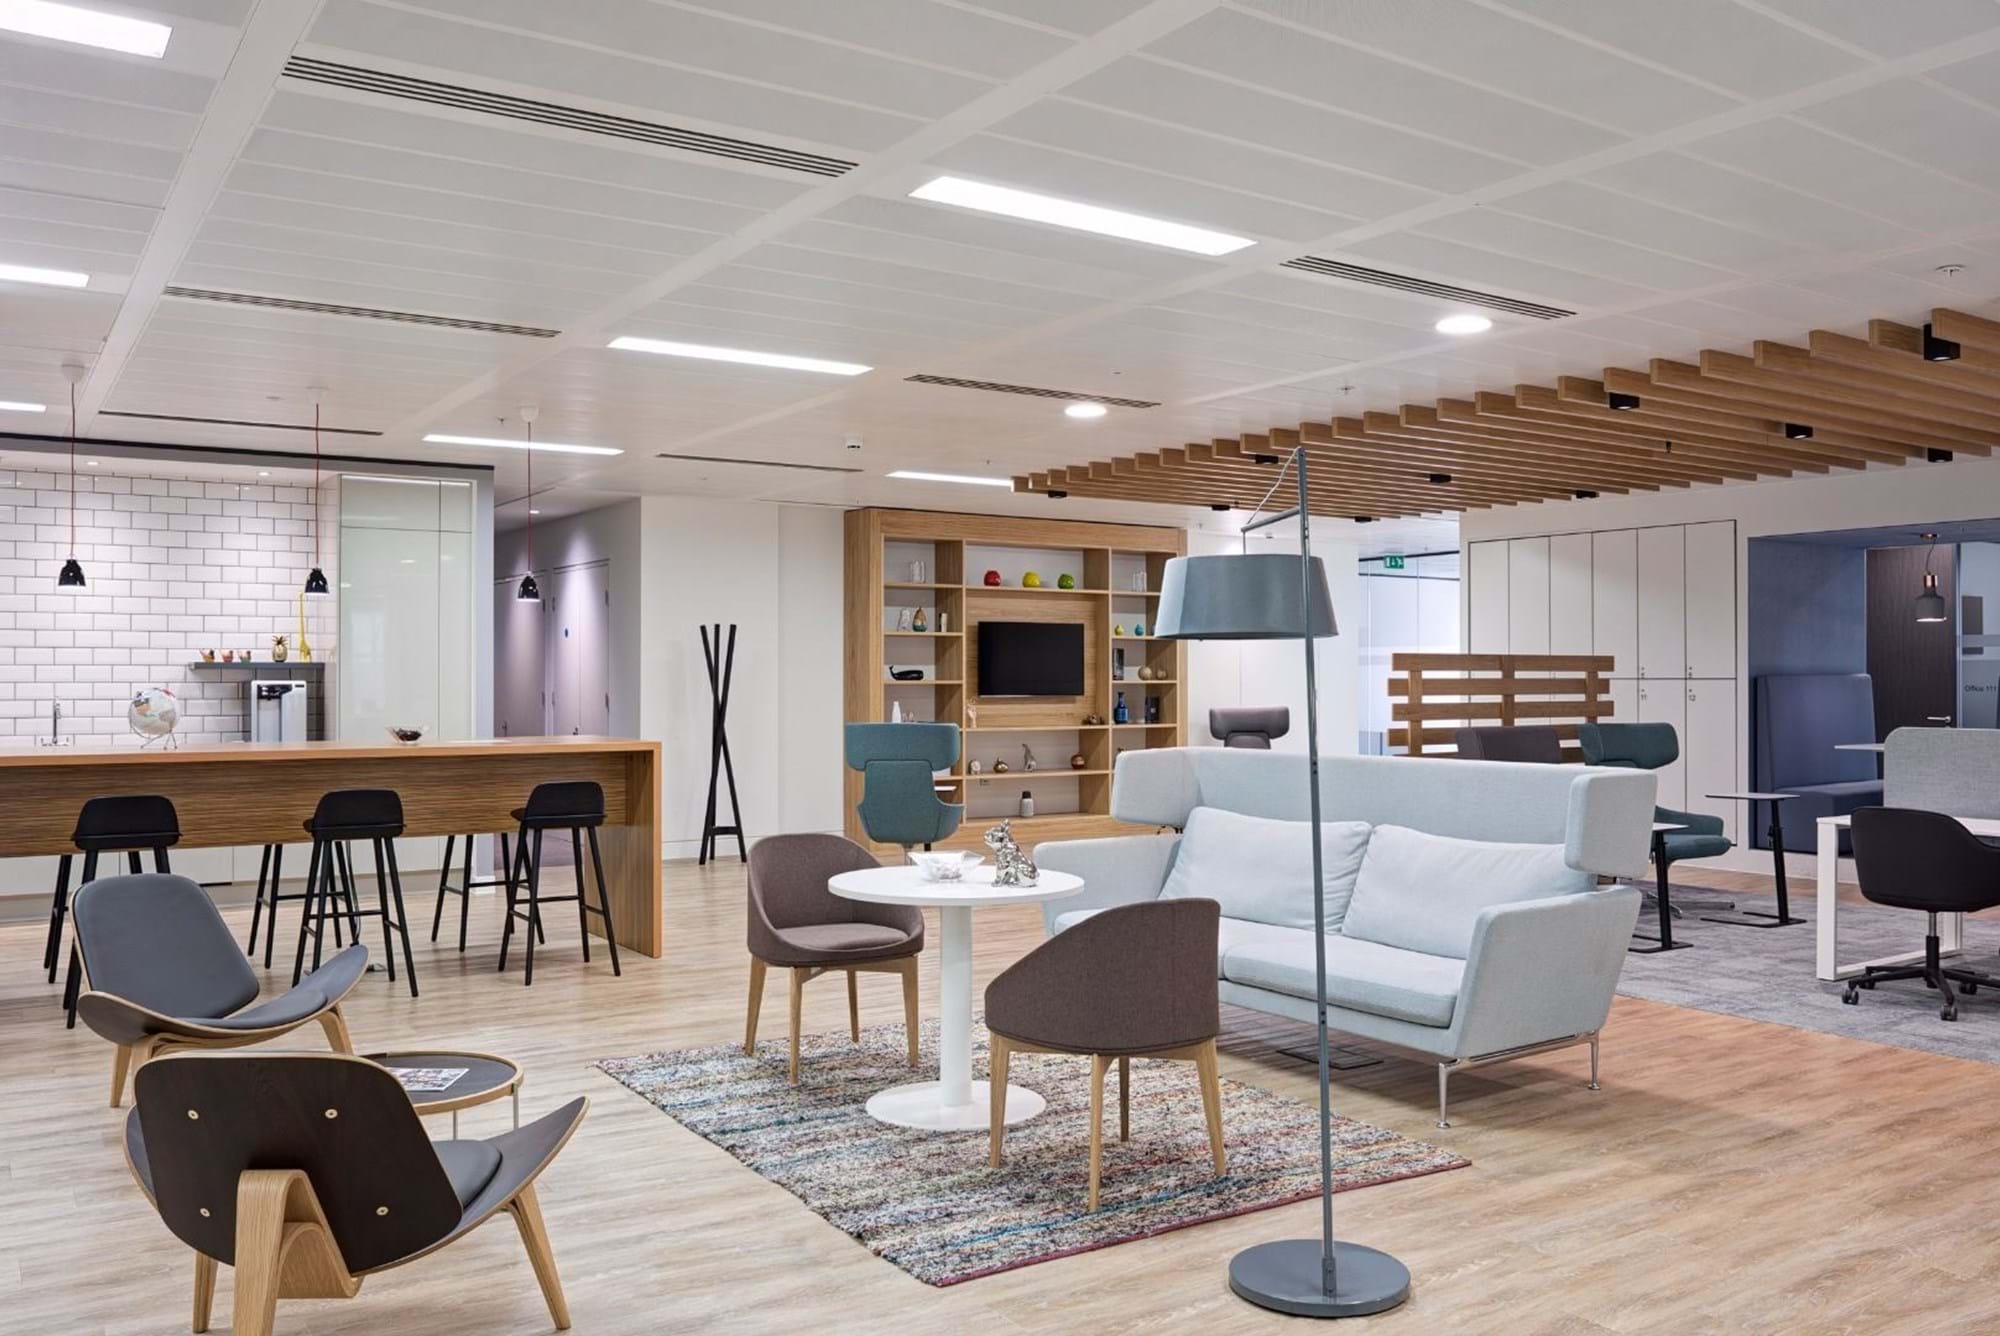 Modus Workspace office design, fit out and refurbishment - Regus St Marys Axe - Regus SMA 06 highres sRGB.jpg